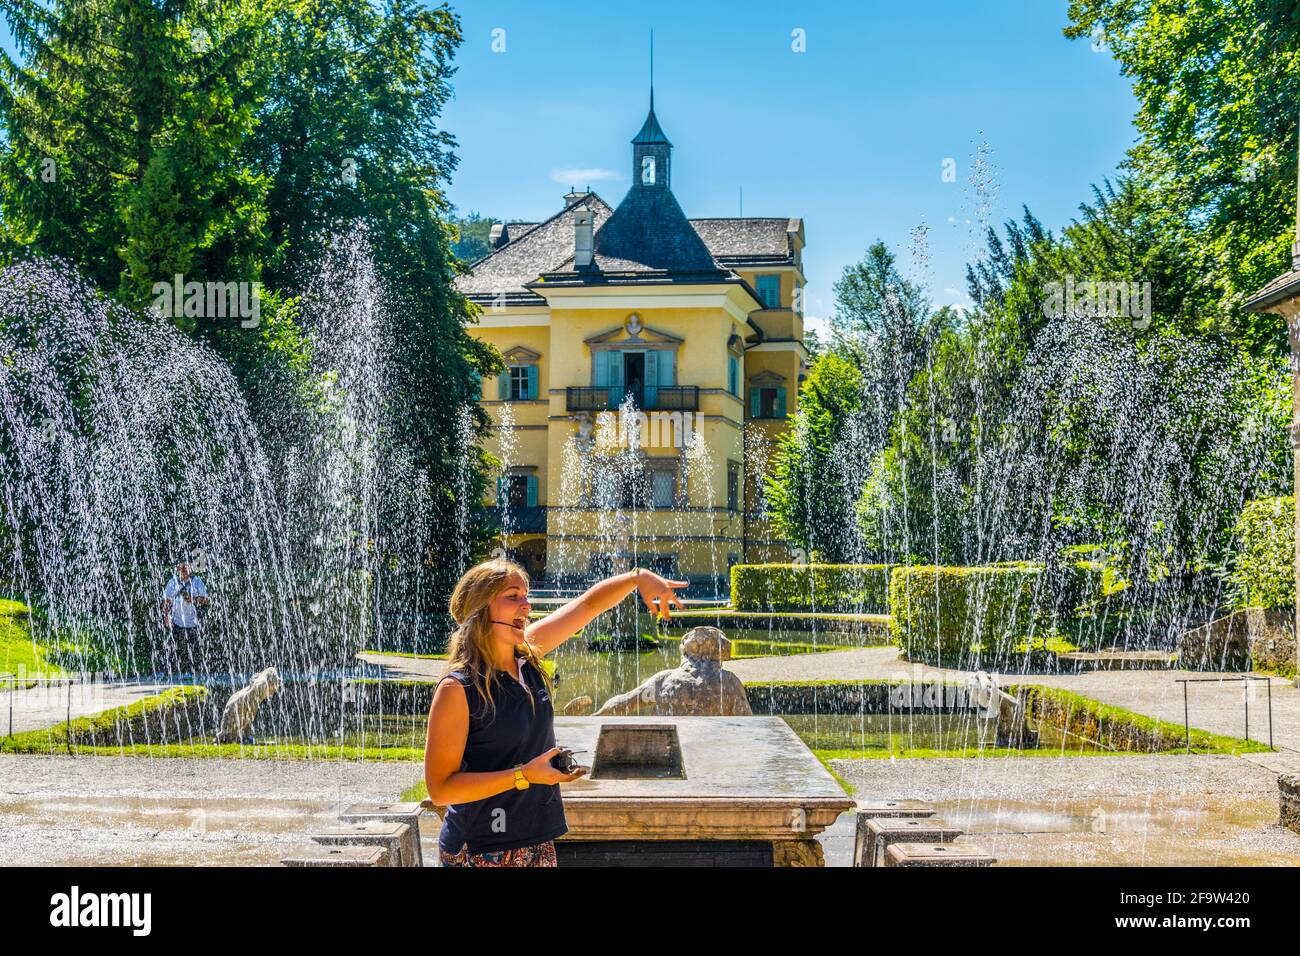 HELLBRUNN, AUSTRIA, JULY 30, 2016: A guide is introducing visitors to a trick fountain in the Hellbrunn Palace in Salzburg, Austria. Stock Photo